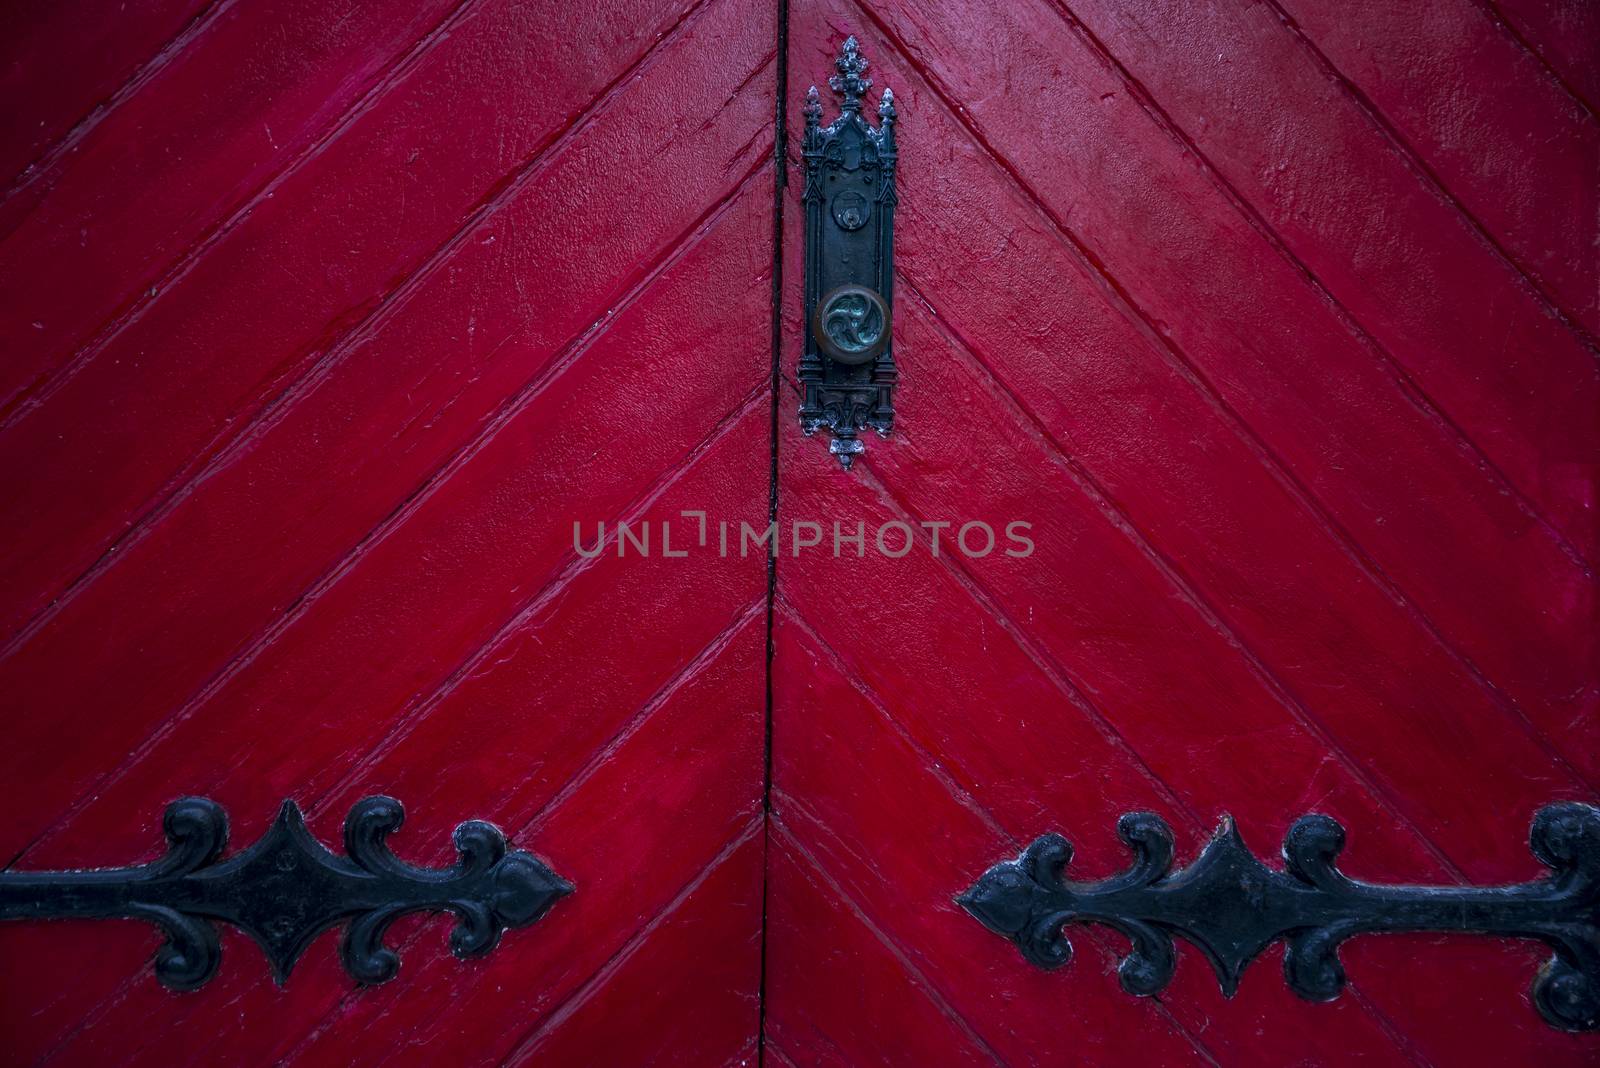 old red wooden door outside an American house in New England